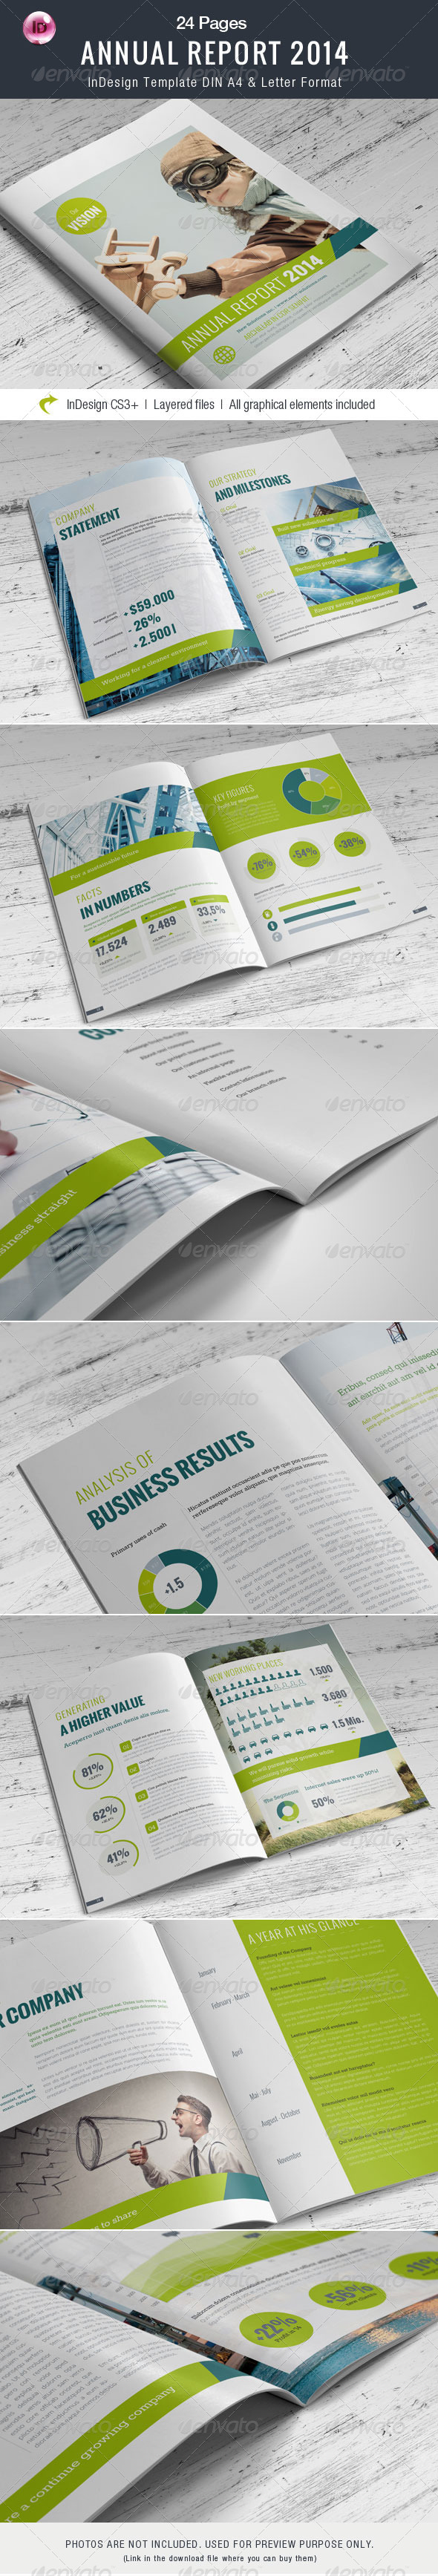 GraphicRiver Annual Report 24 Pages 7694508